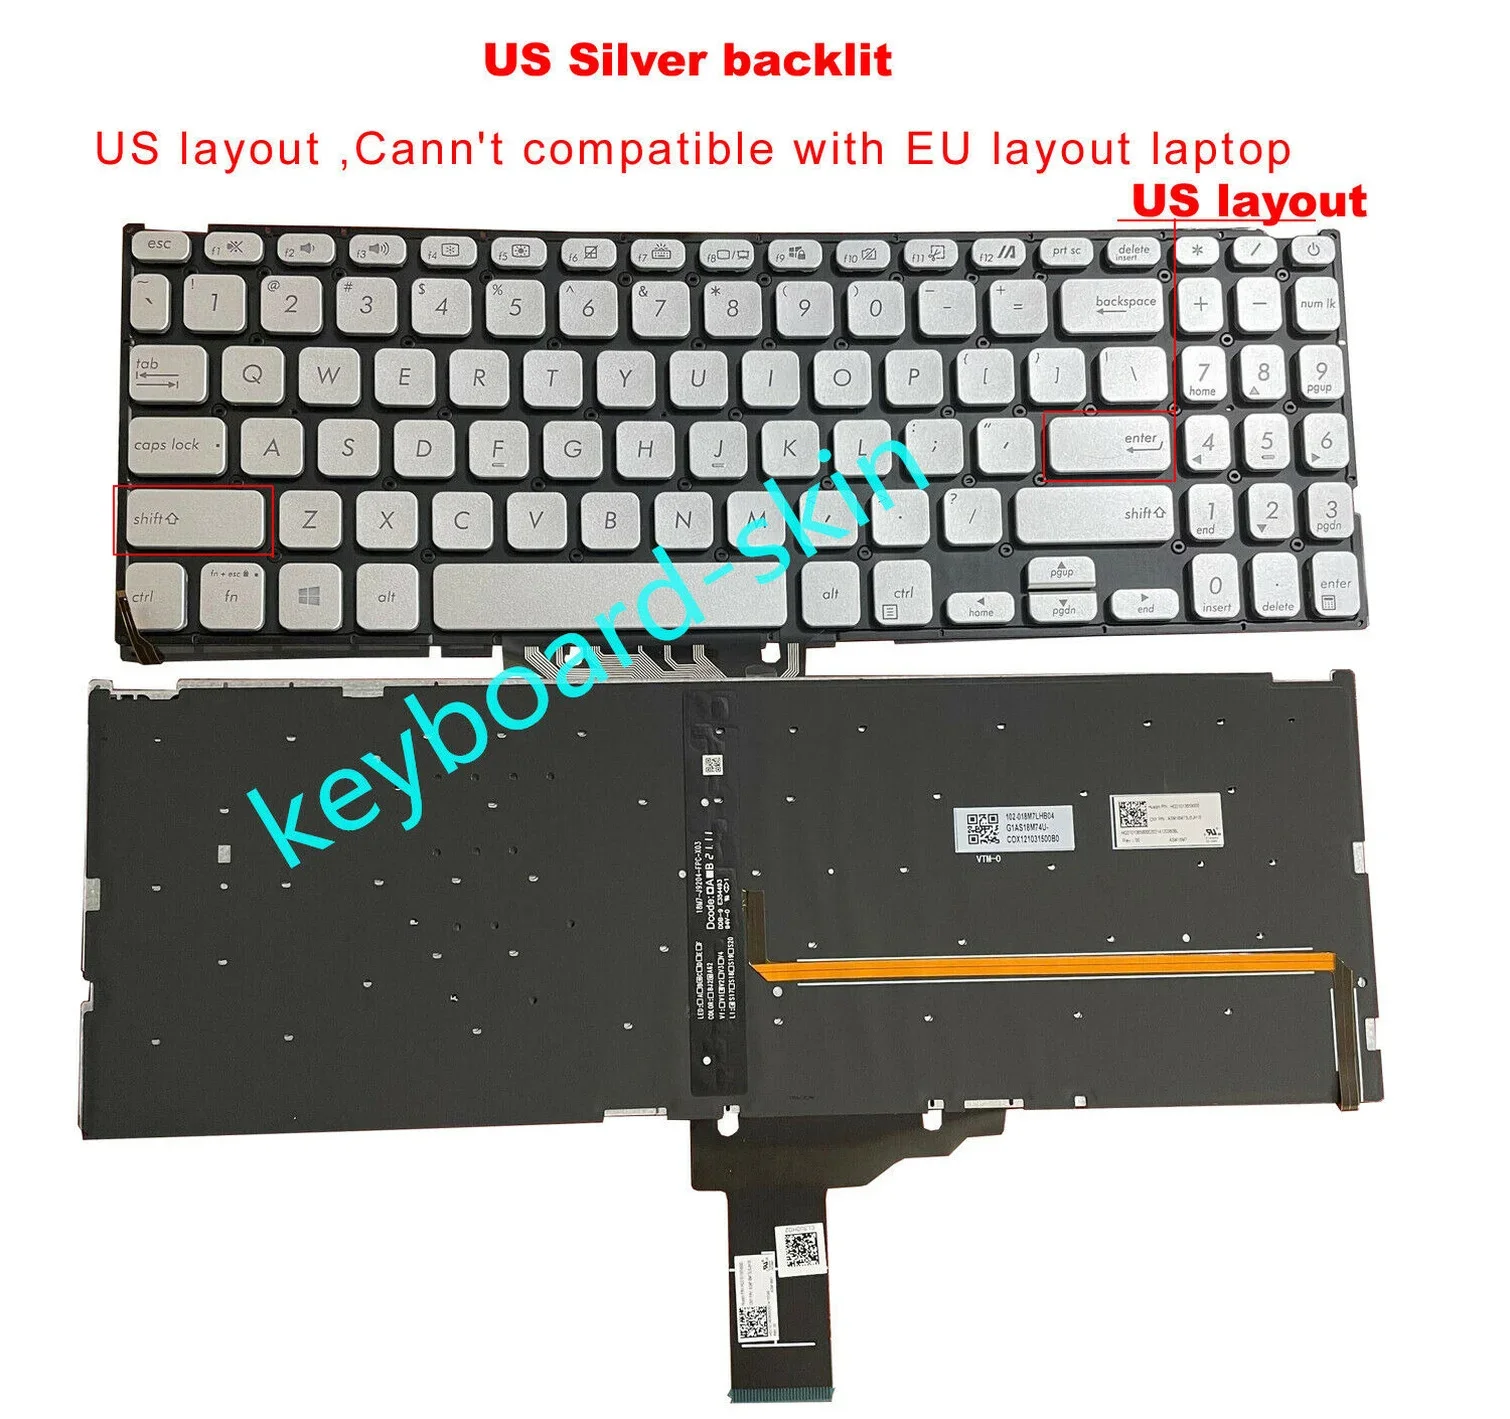 

New Silver US backlit Keyboard for ASUS VivoBook X515 X515E X515EA X515M X515MA X515J X515JA X515DA X515UA X515FA X515MA X515JP